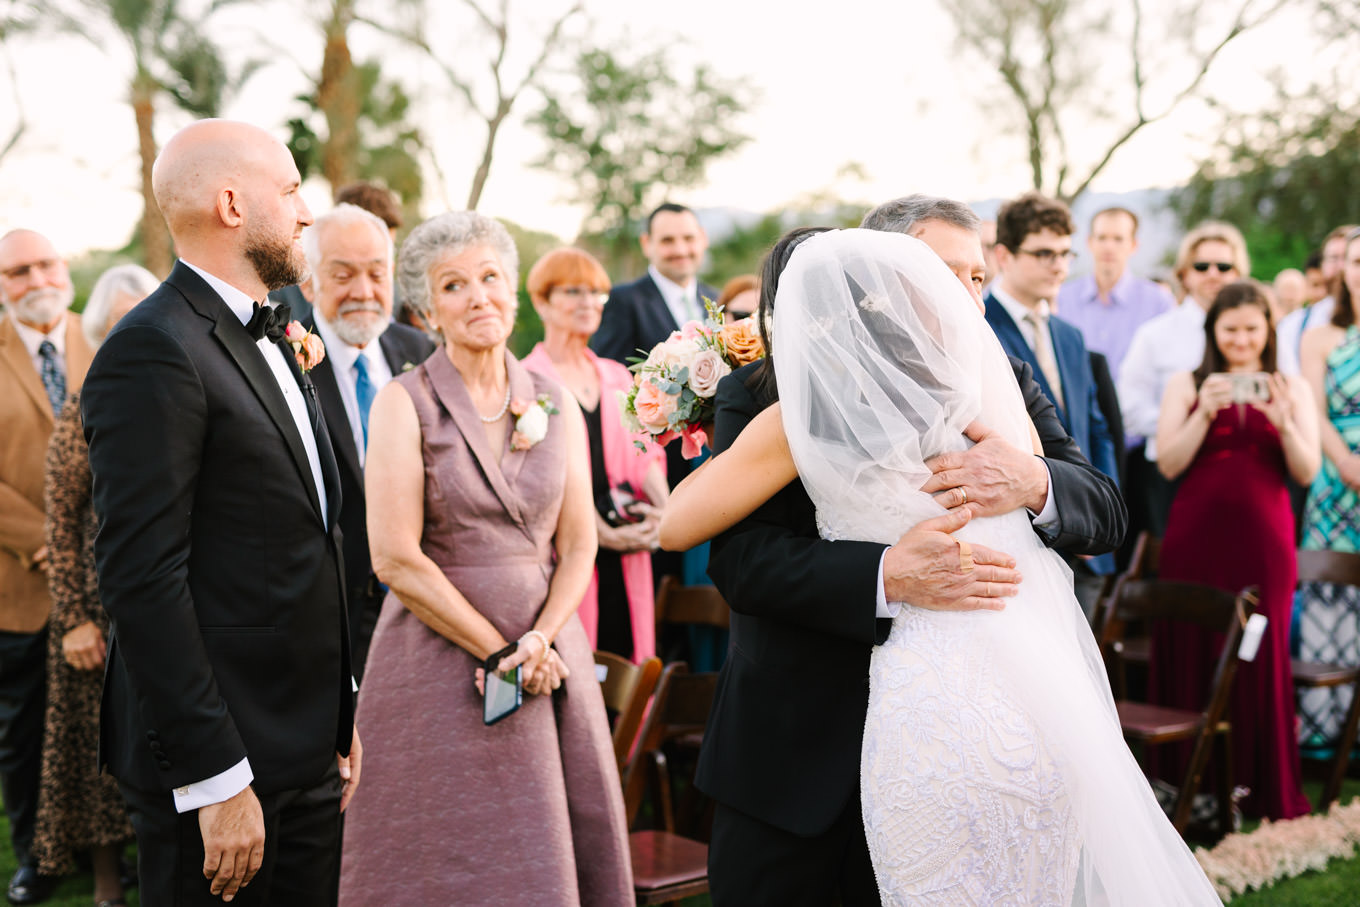 Father hugging Bride | Pink Bougainvillea Estate wedding | Colorful LA wedding photography | #bougainvilleaestate #palmspringswedding #palmspringsweddingvenue #palmspringsphotographer Source: Mary Costa Photography | Los Angeles